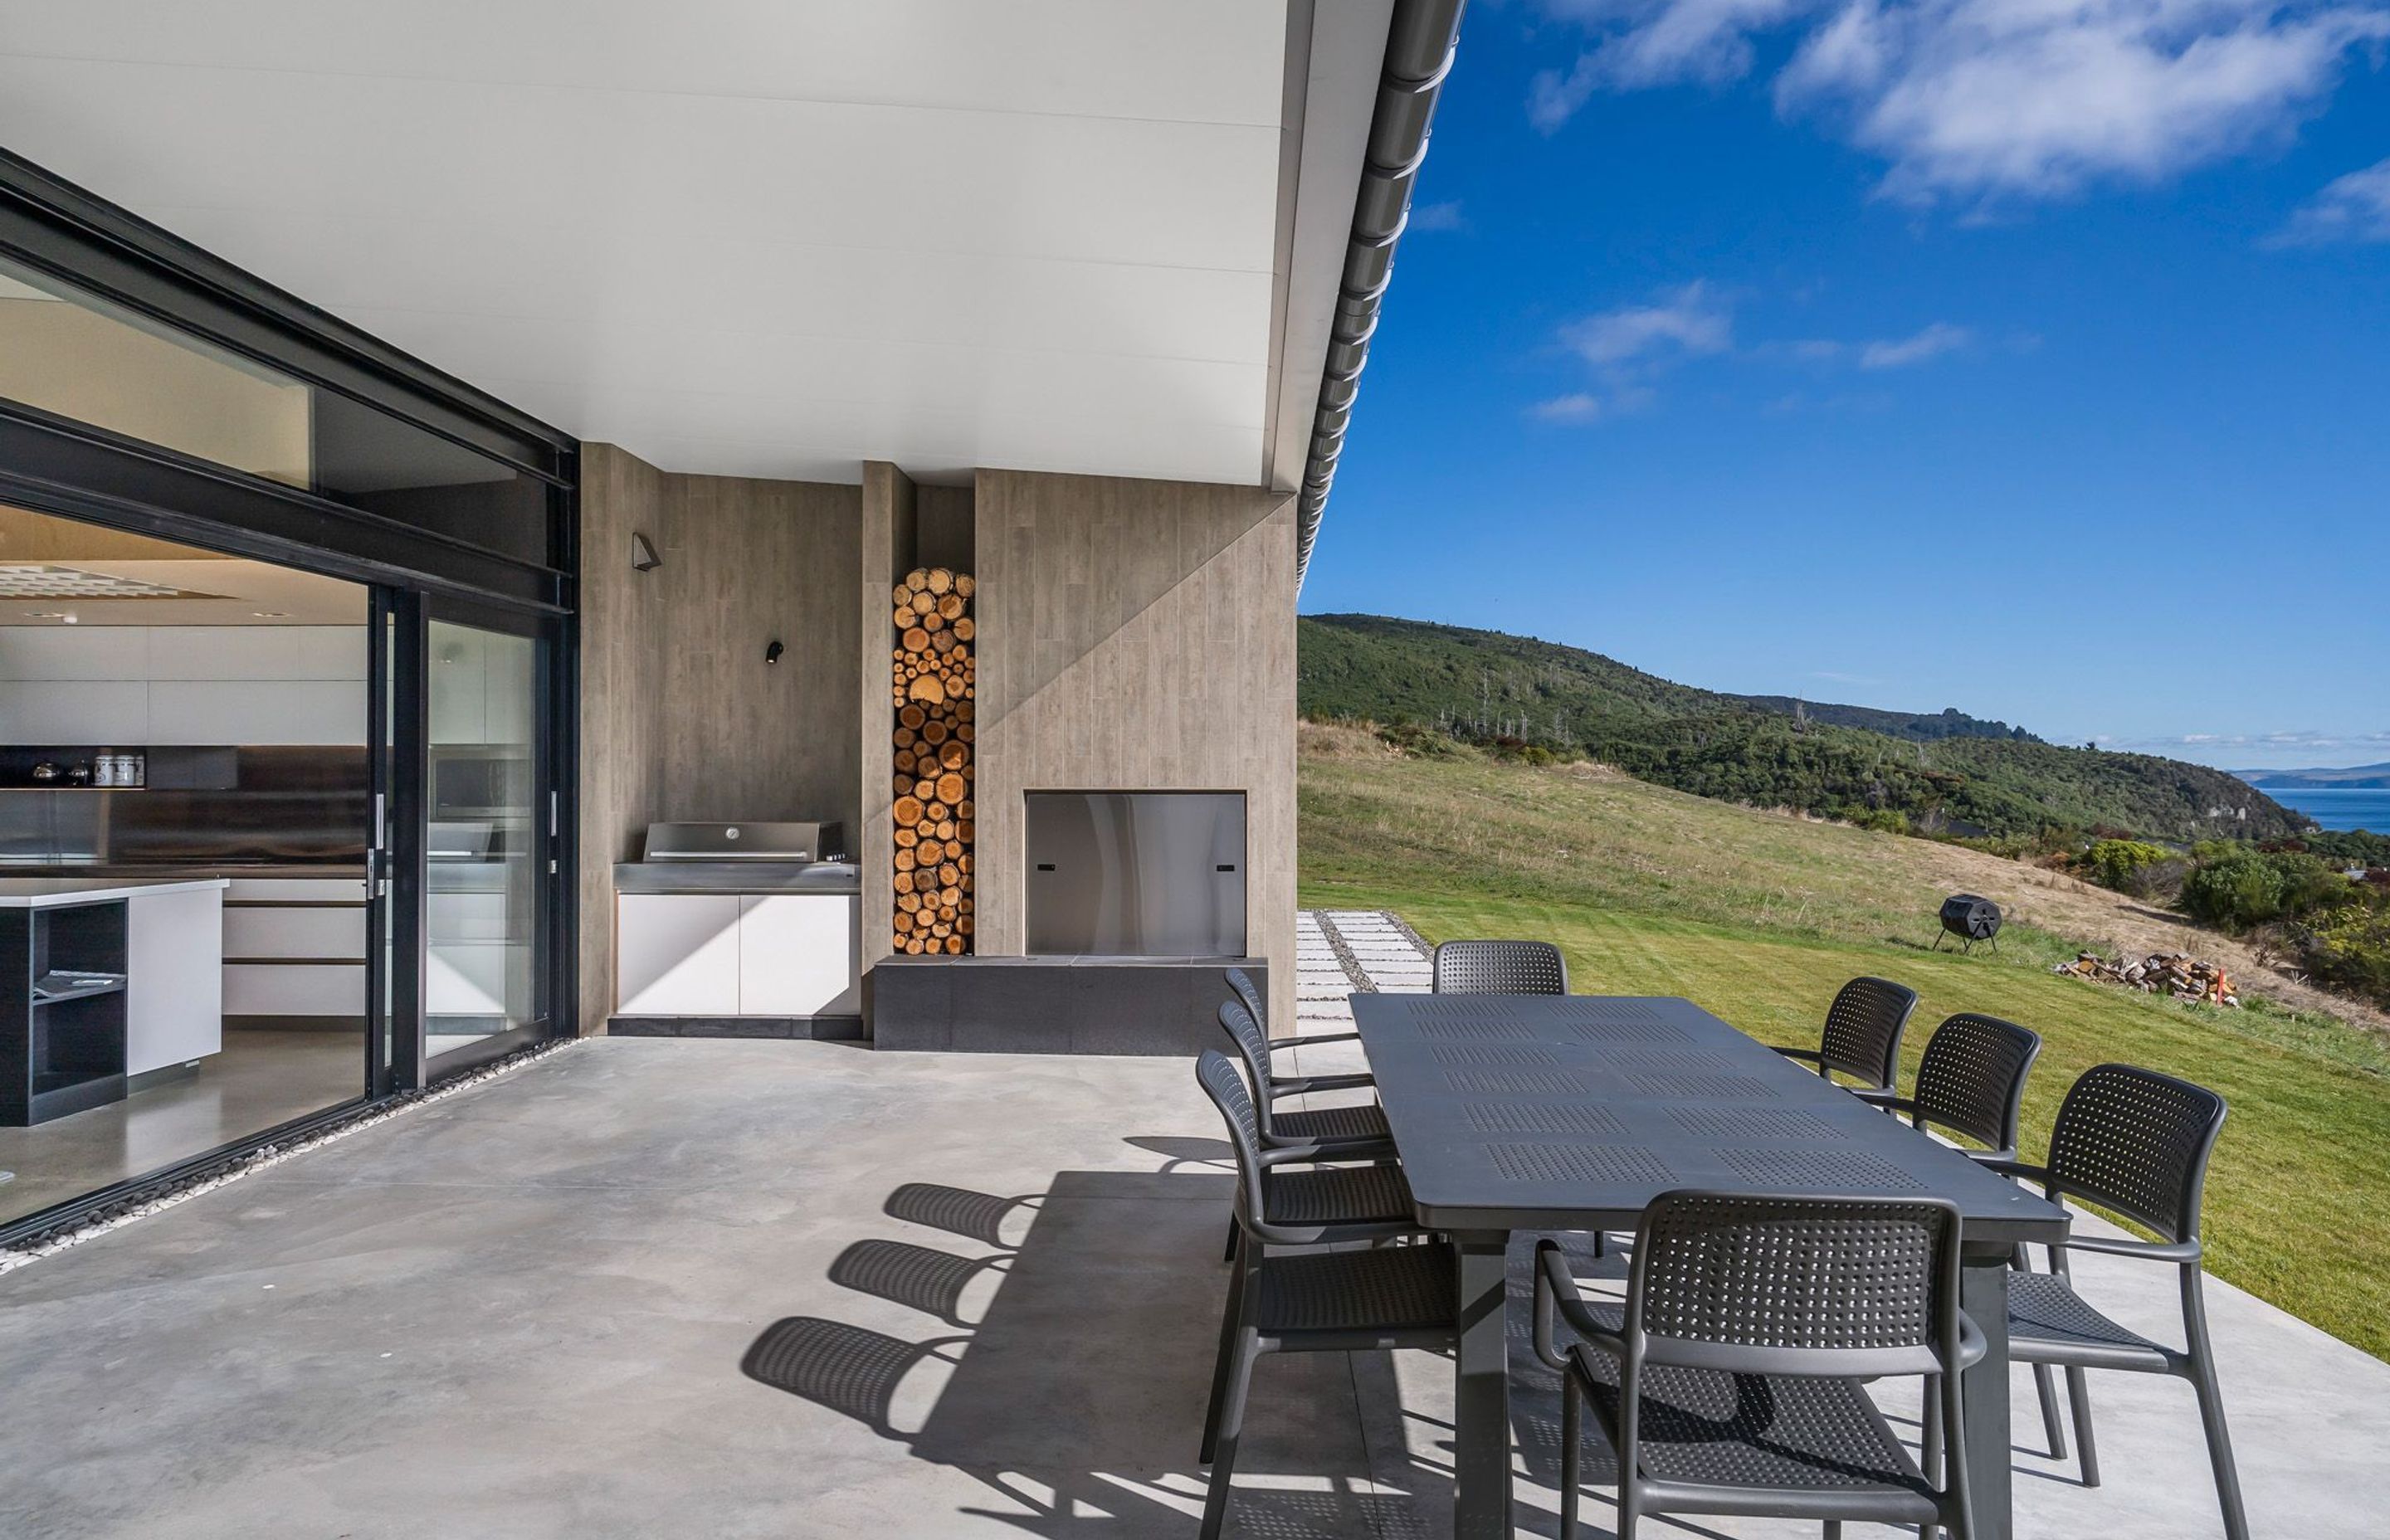 The outside kitchen, BBQ and dining area expands into lawn and overlooks Lake Taupo. Photograph: ArchiPro